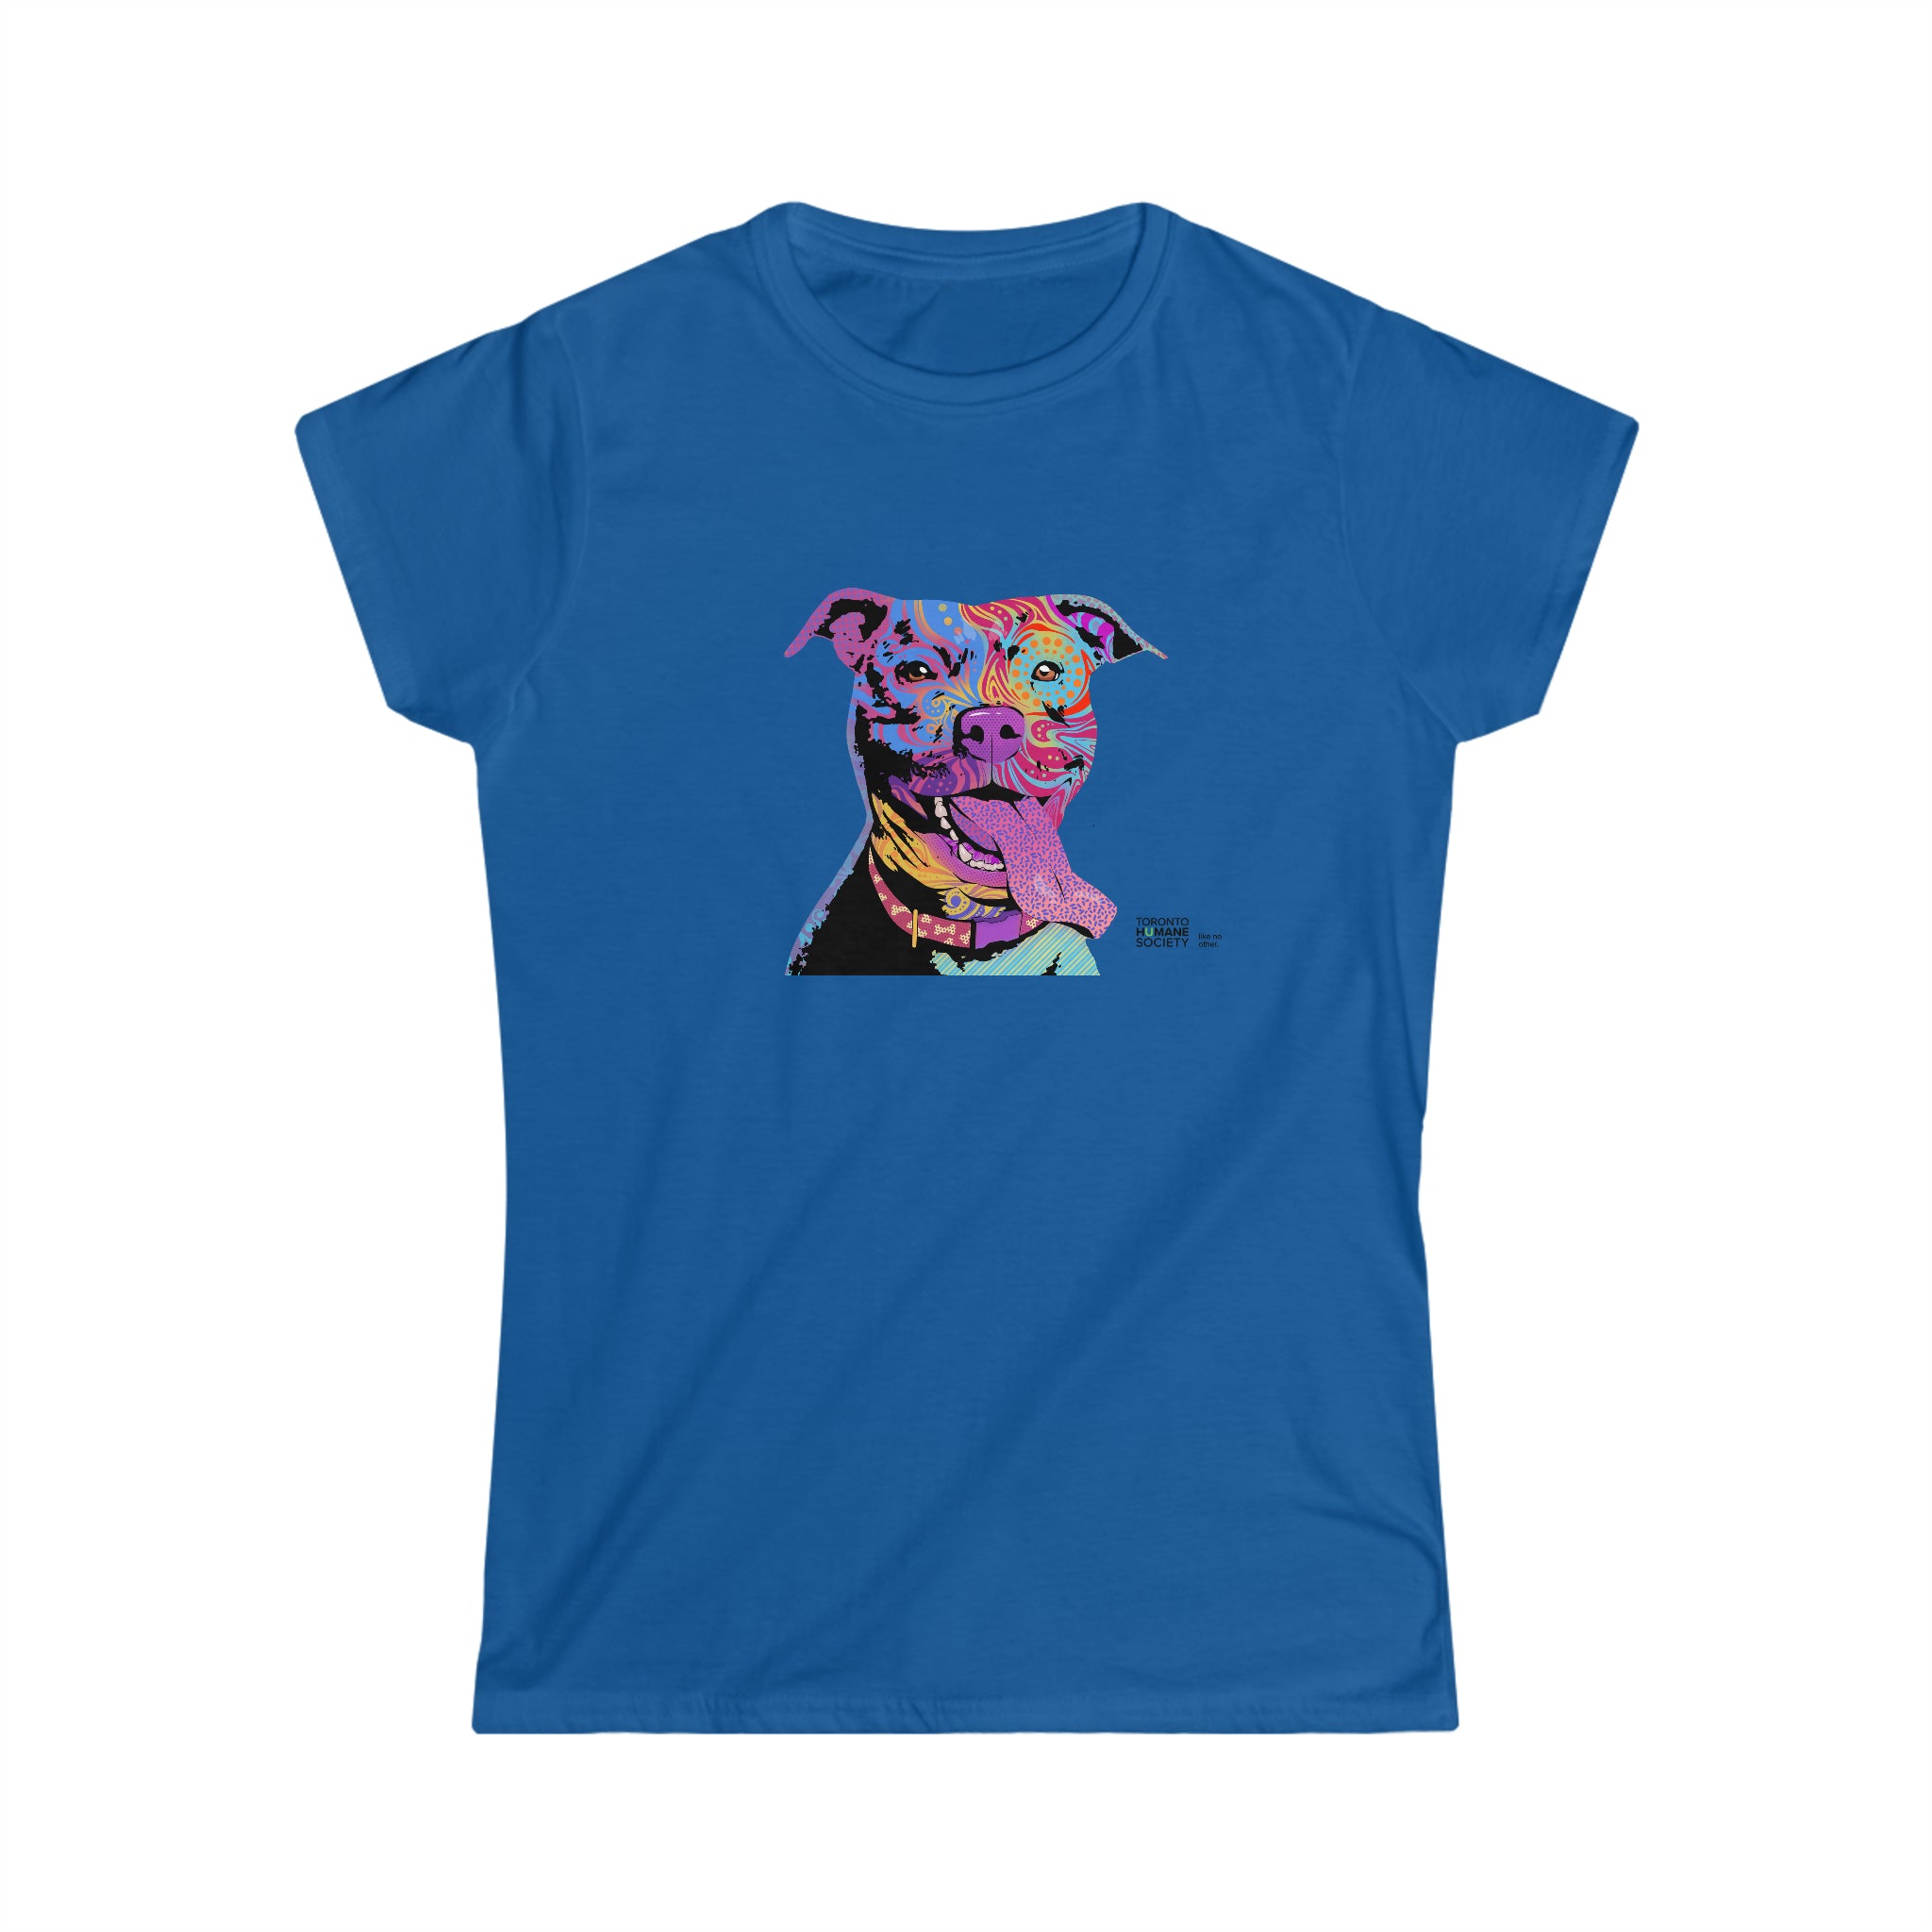 Women's Softstyle Tee - Abstract Dog